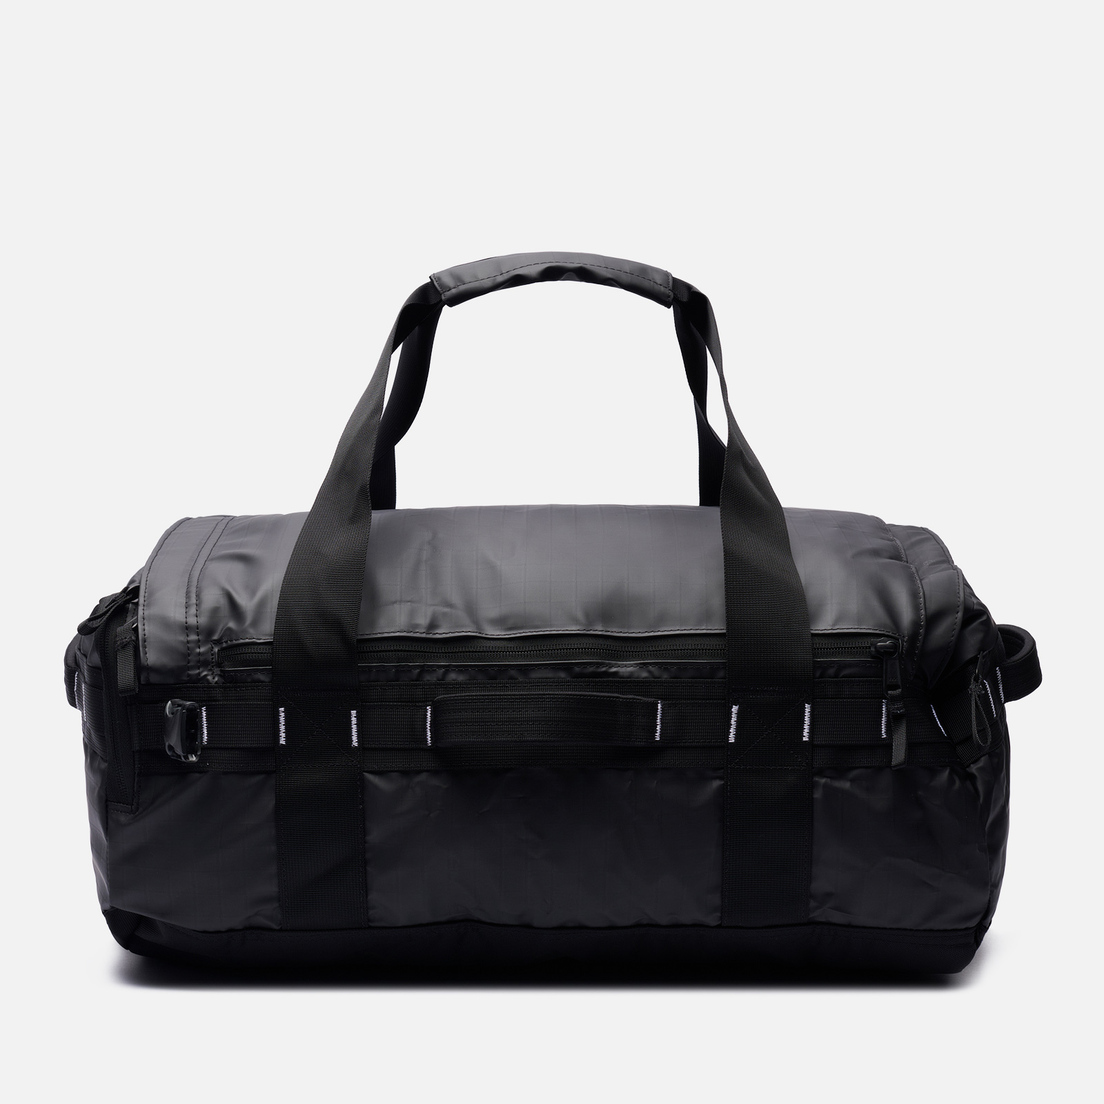 The North Face Дорожная сумка Base Camp Voyager Duffel S